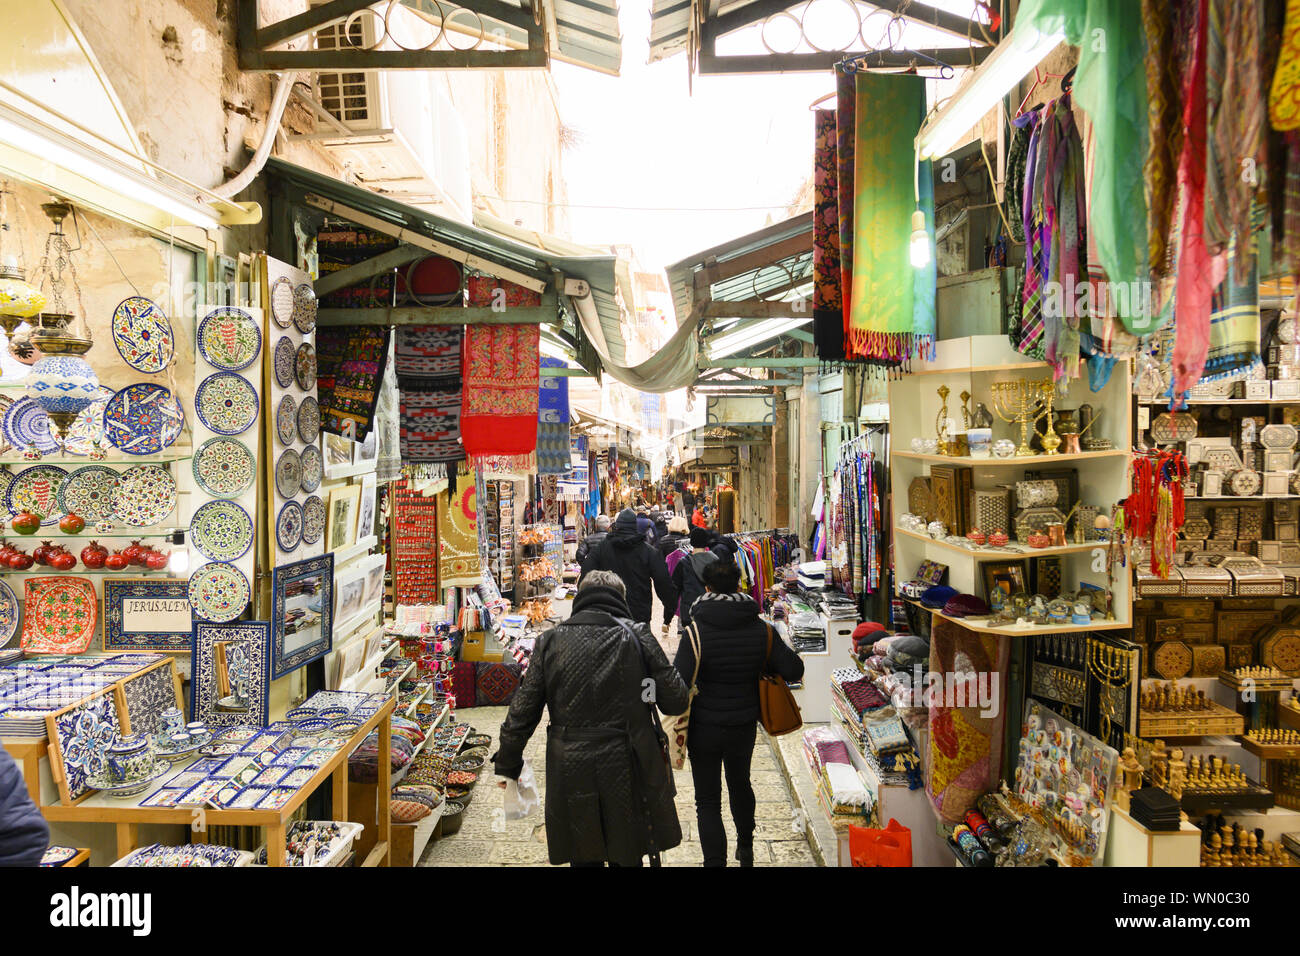 Locals and tourists at the Mahane Yehuda Market on a busy Friday. Mahane Yehuda Market often referred to as "The Shuk is a marketplace in Jerusalem. Stock Photo